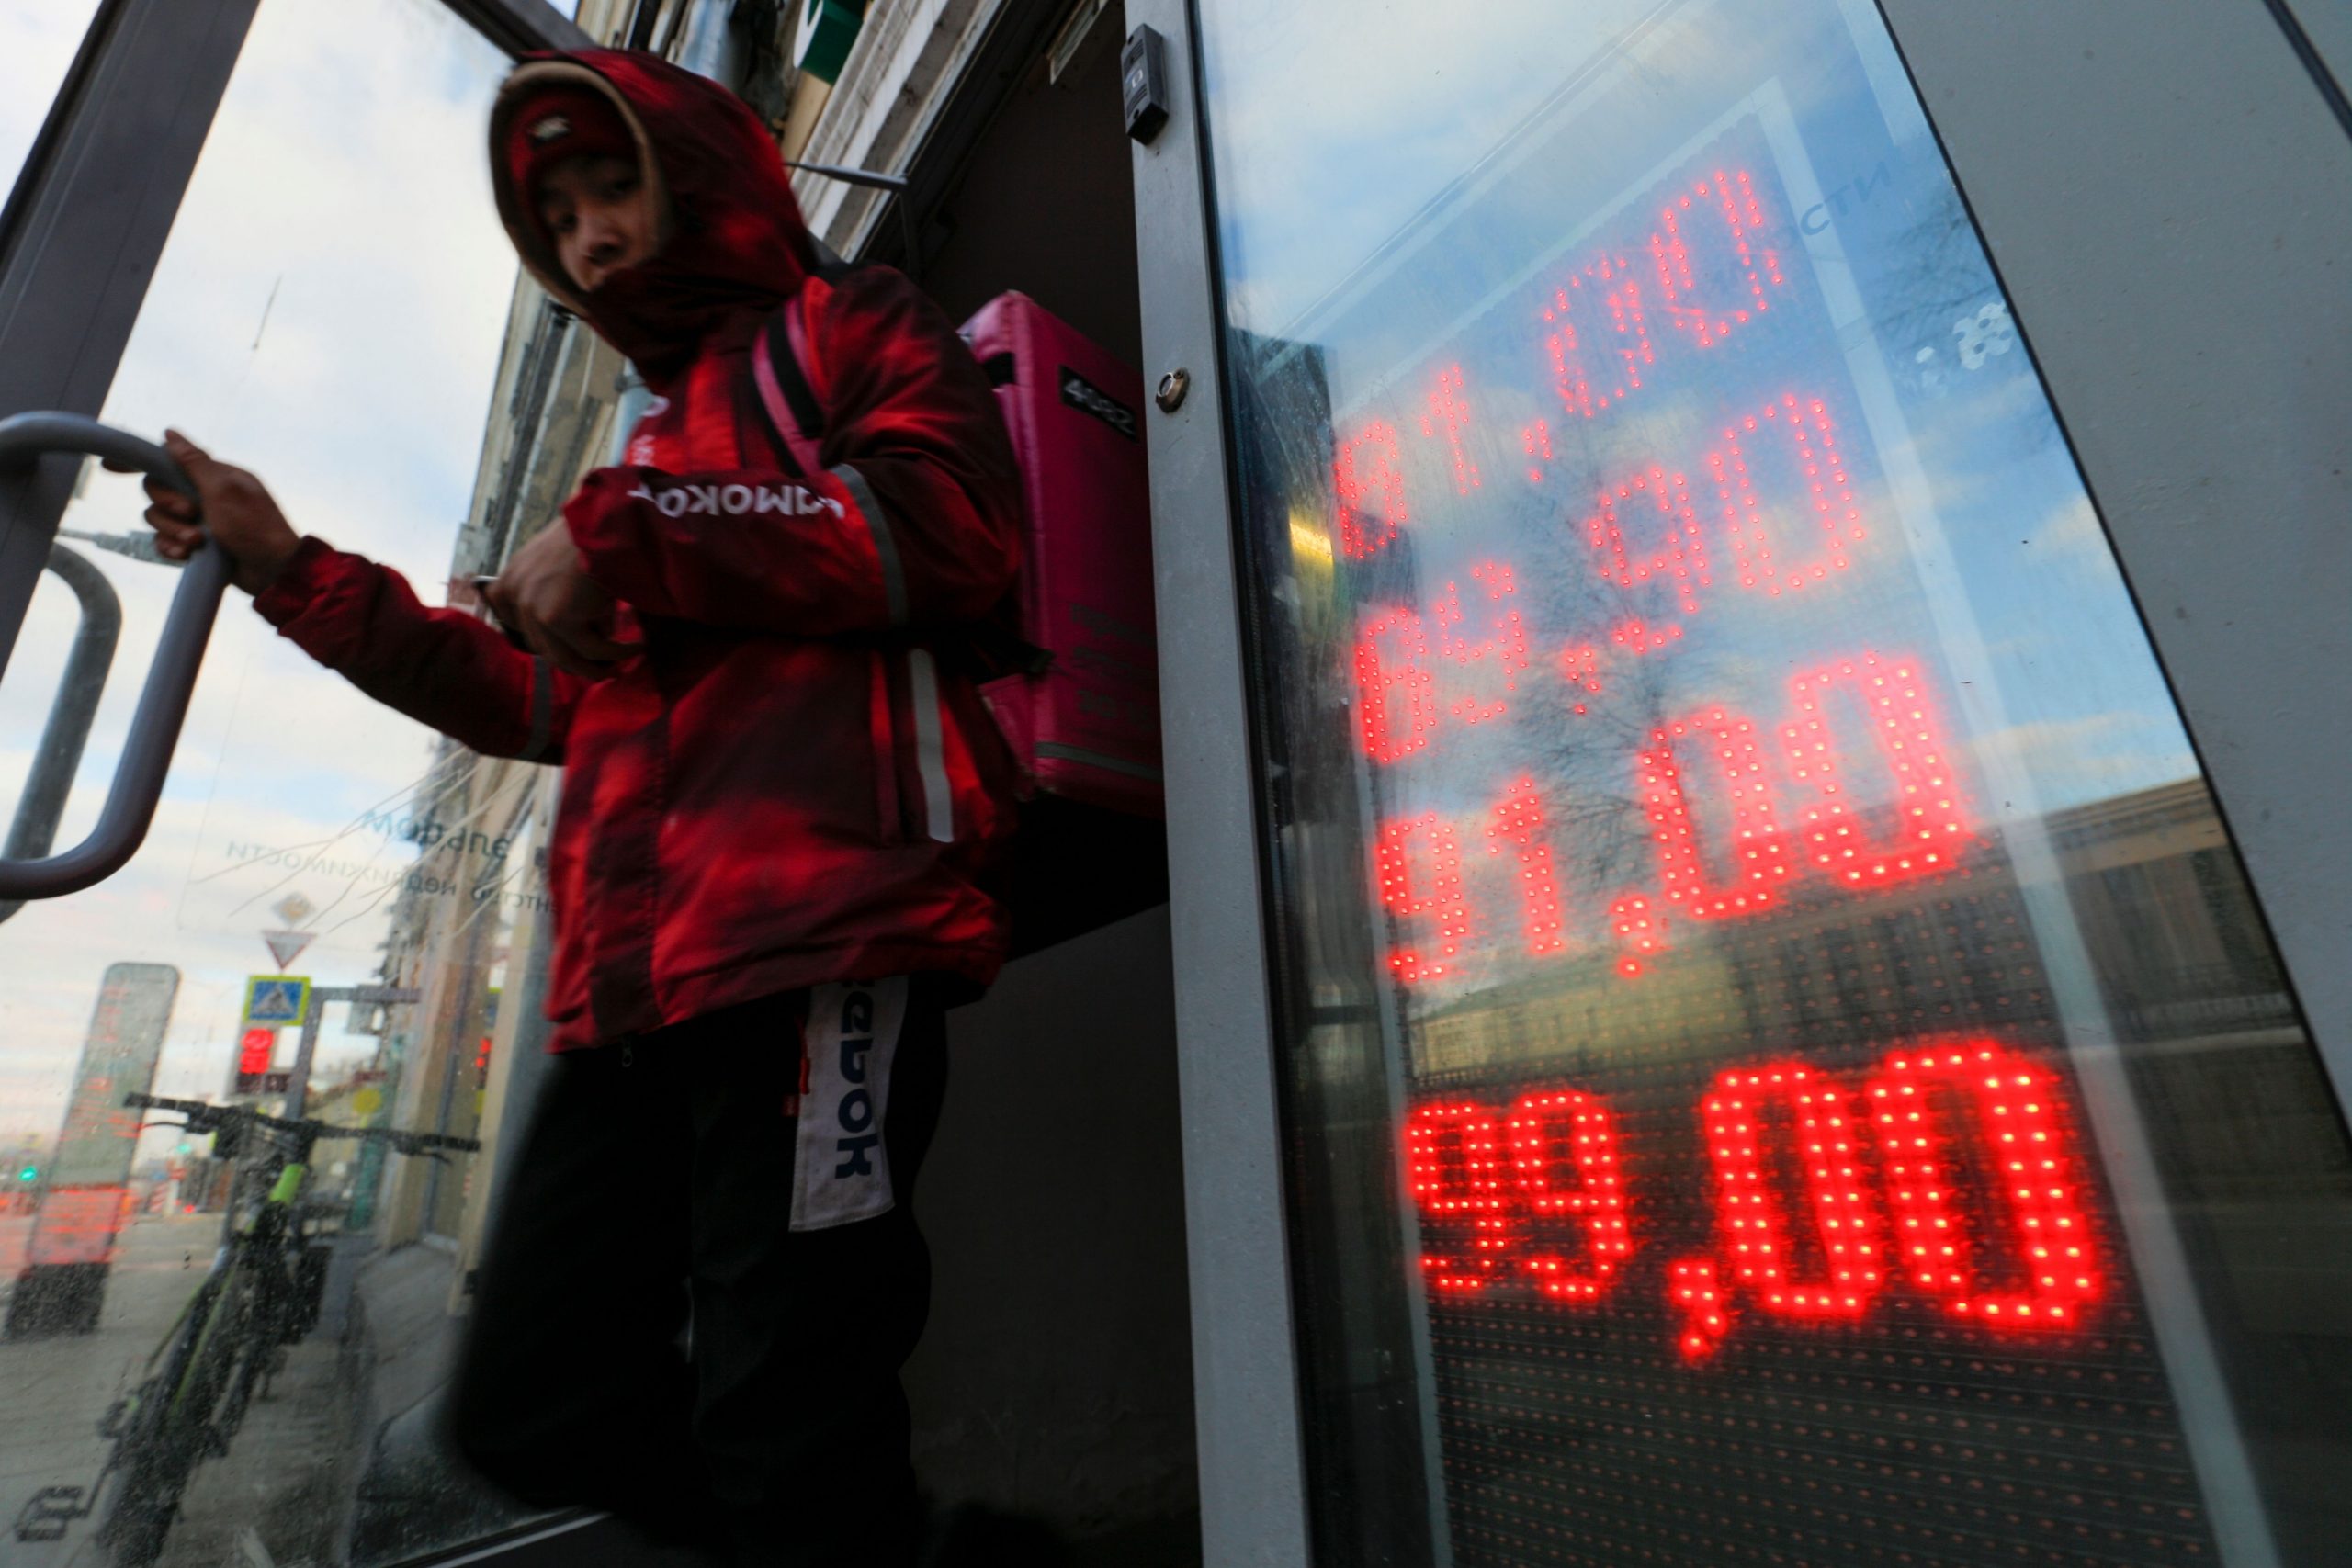 Ruble drops 26% after SWIFT sanctions against Russia over Ukraine invasion